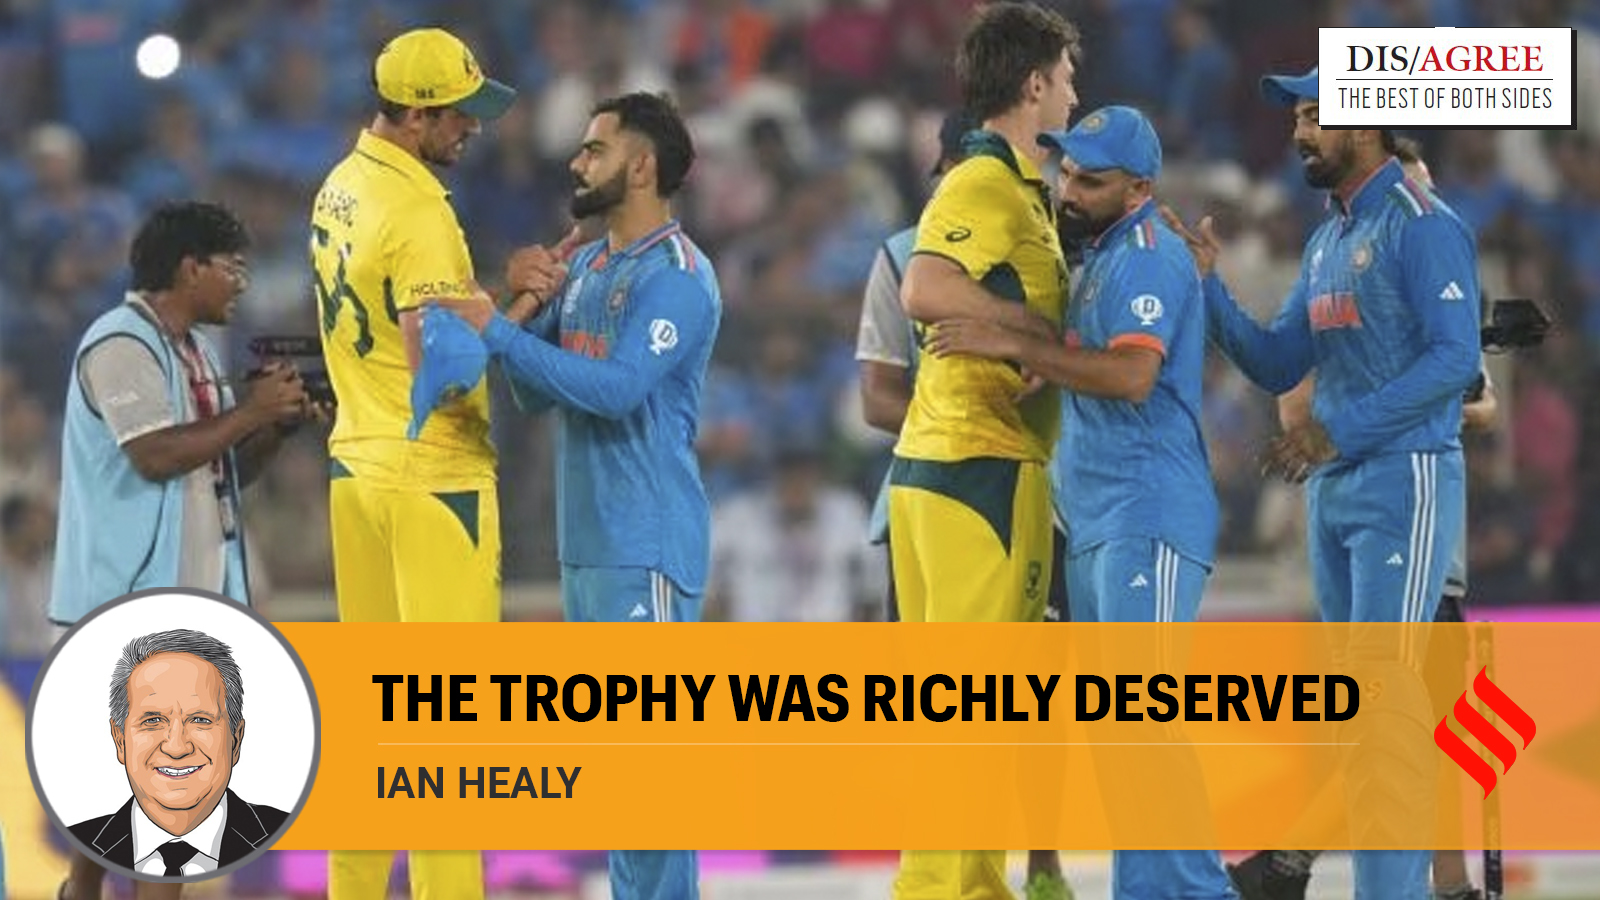 Best of Both Sides | Ian Healy writes: India was the dominant team in the World Cup. But Australia proved to be the best team